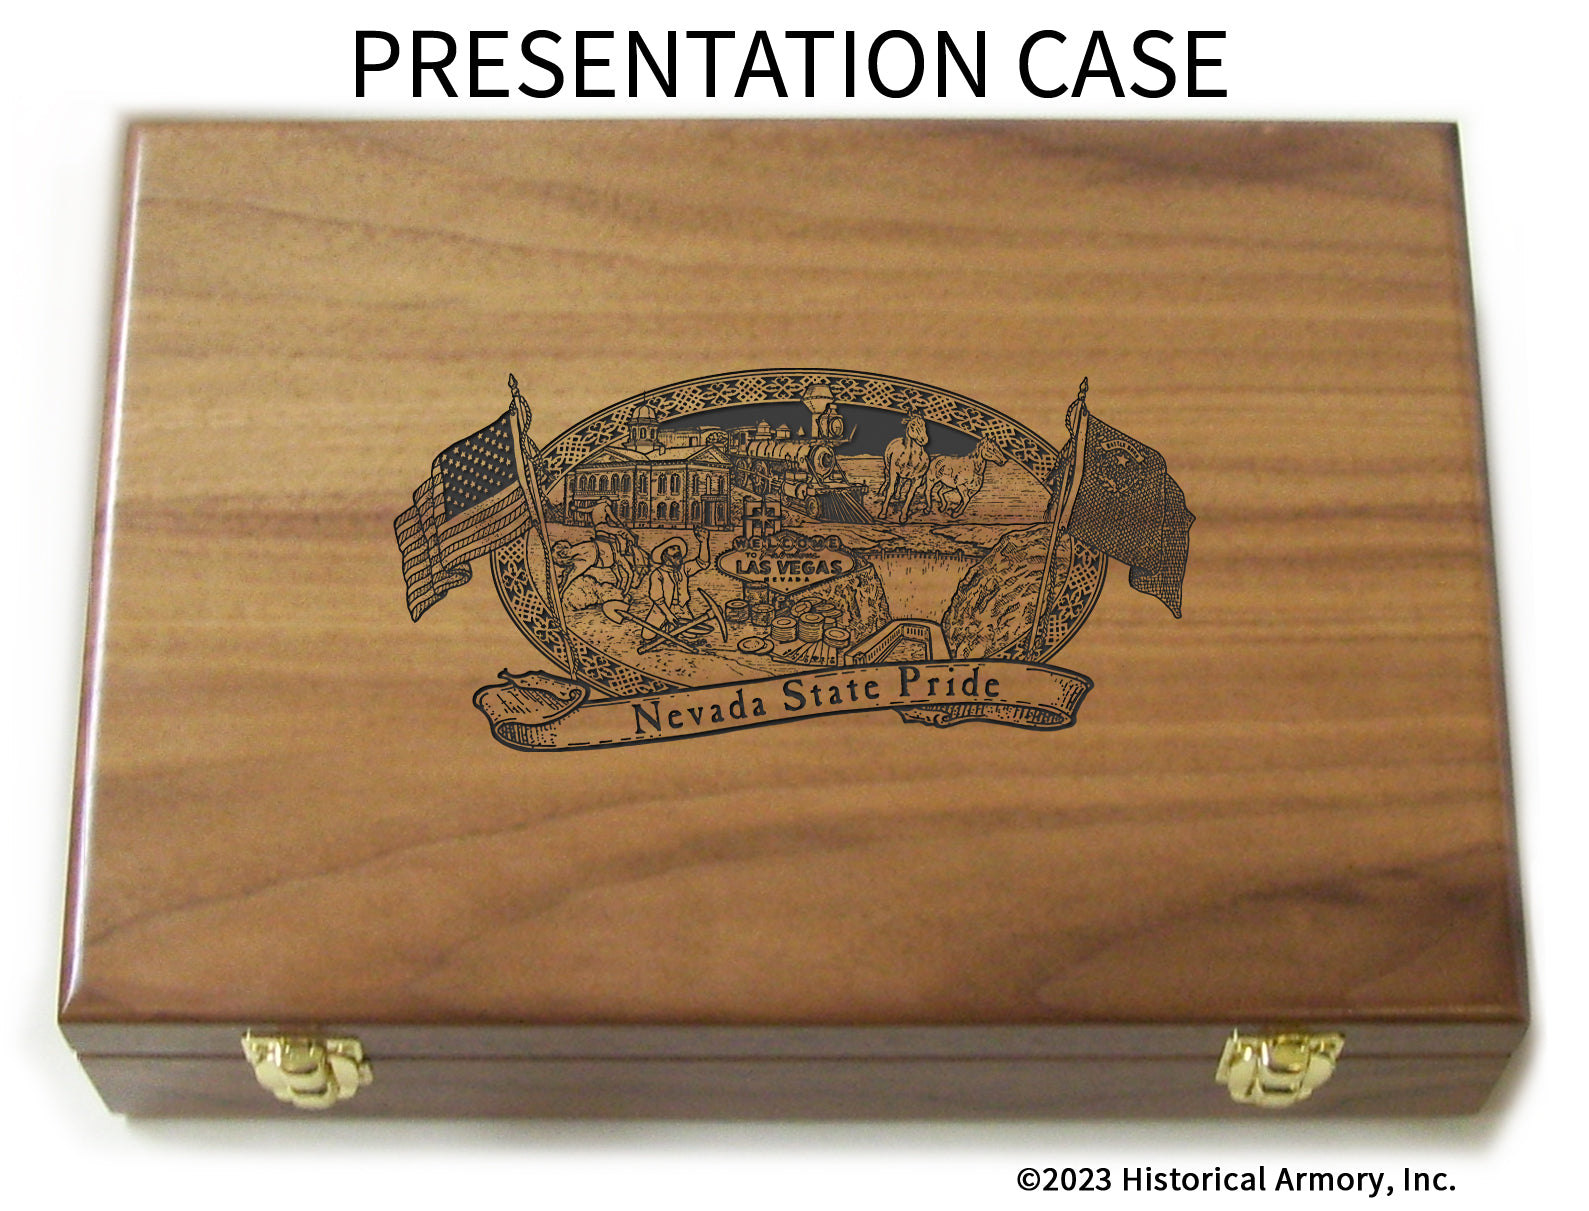 Nevada State Pride Limited Edition Engraved 1911 Presentation Case